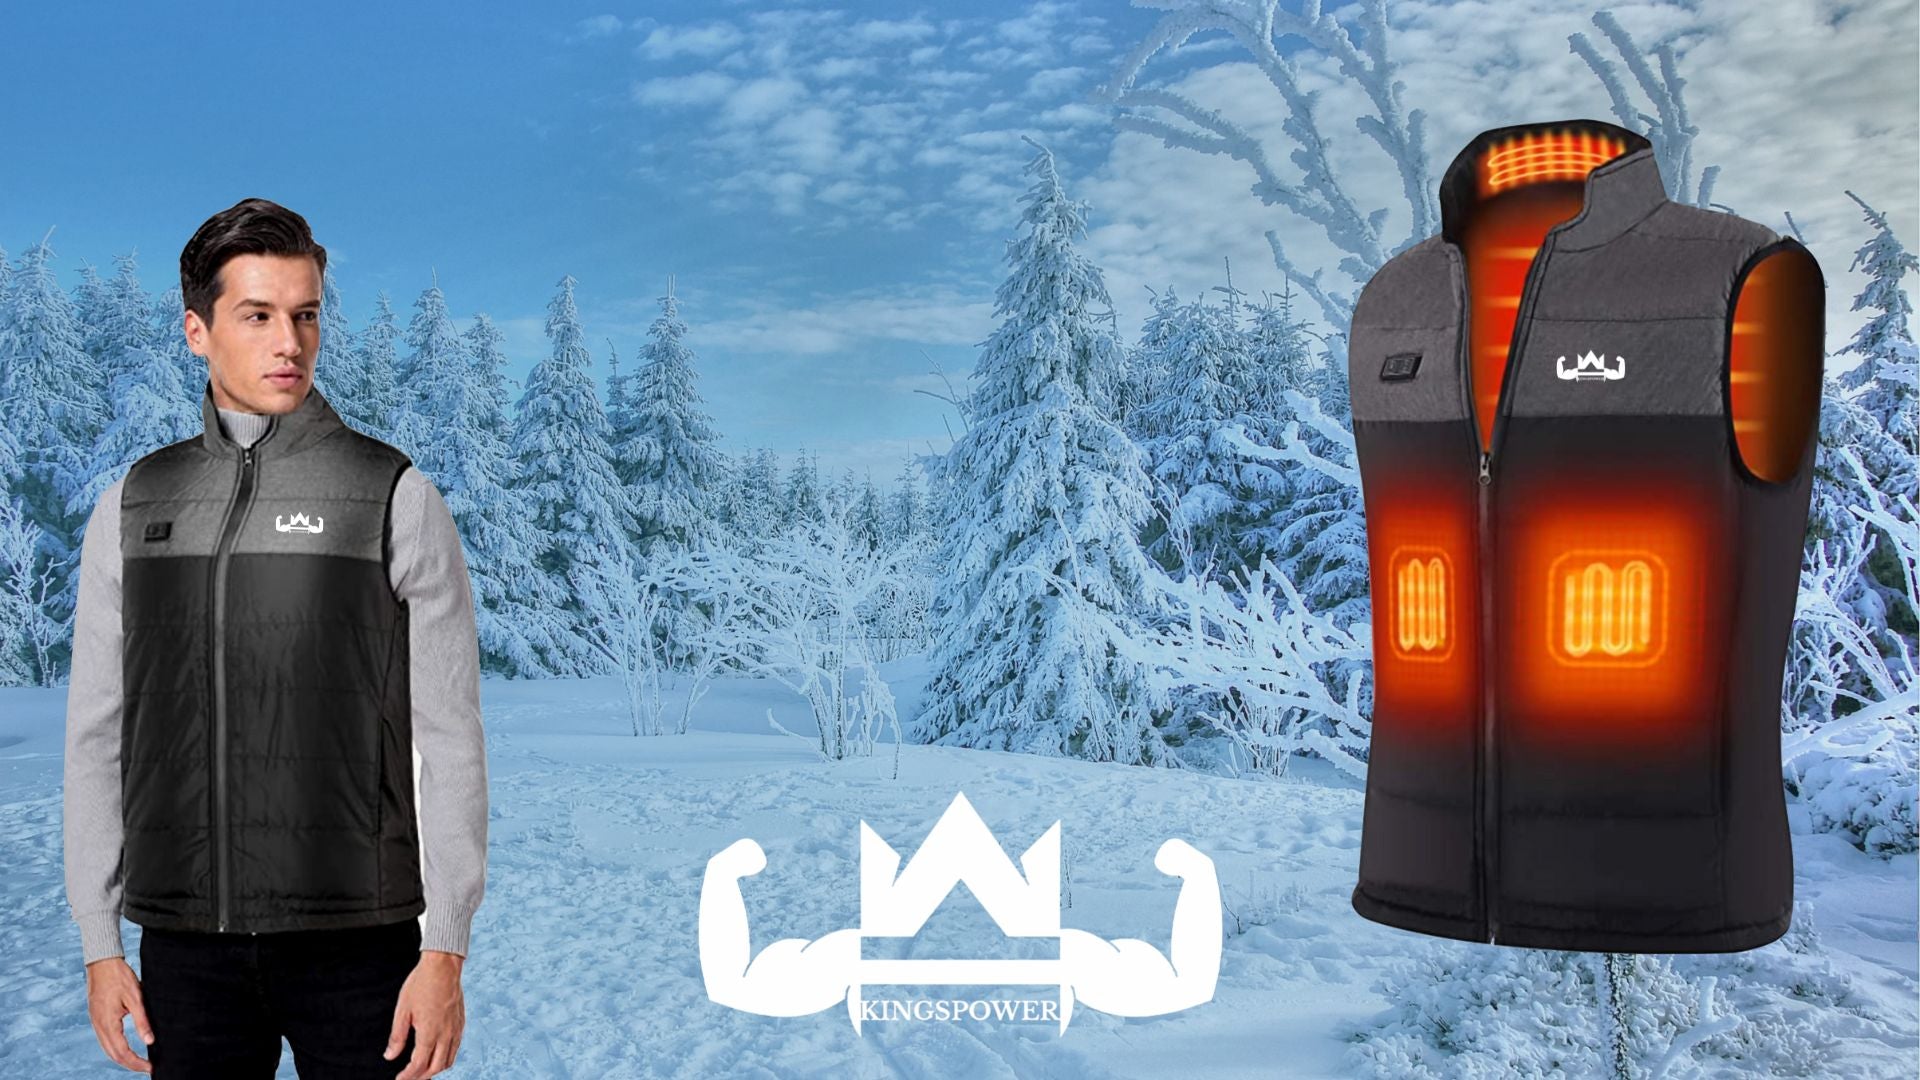 Lataa video: Manual of how to use the heated body warmer.